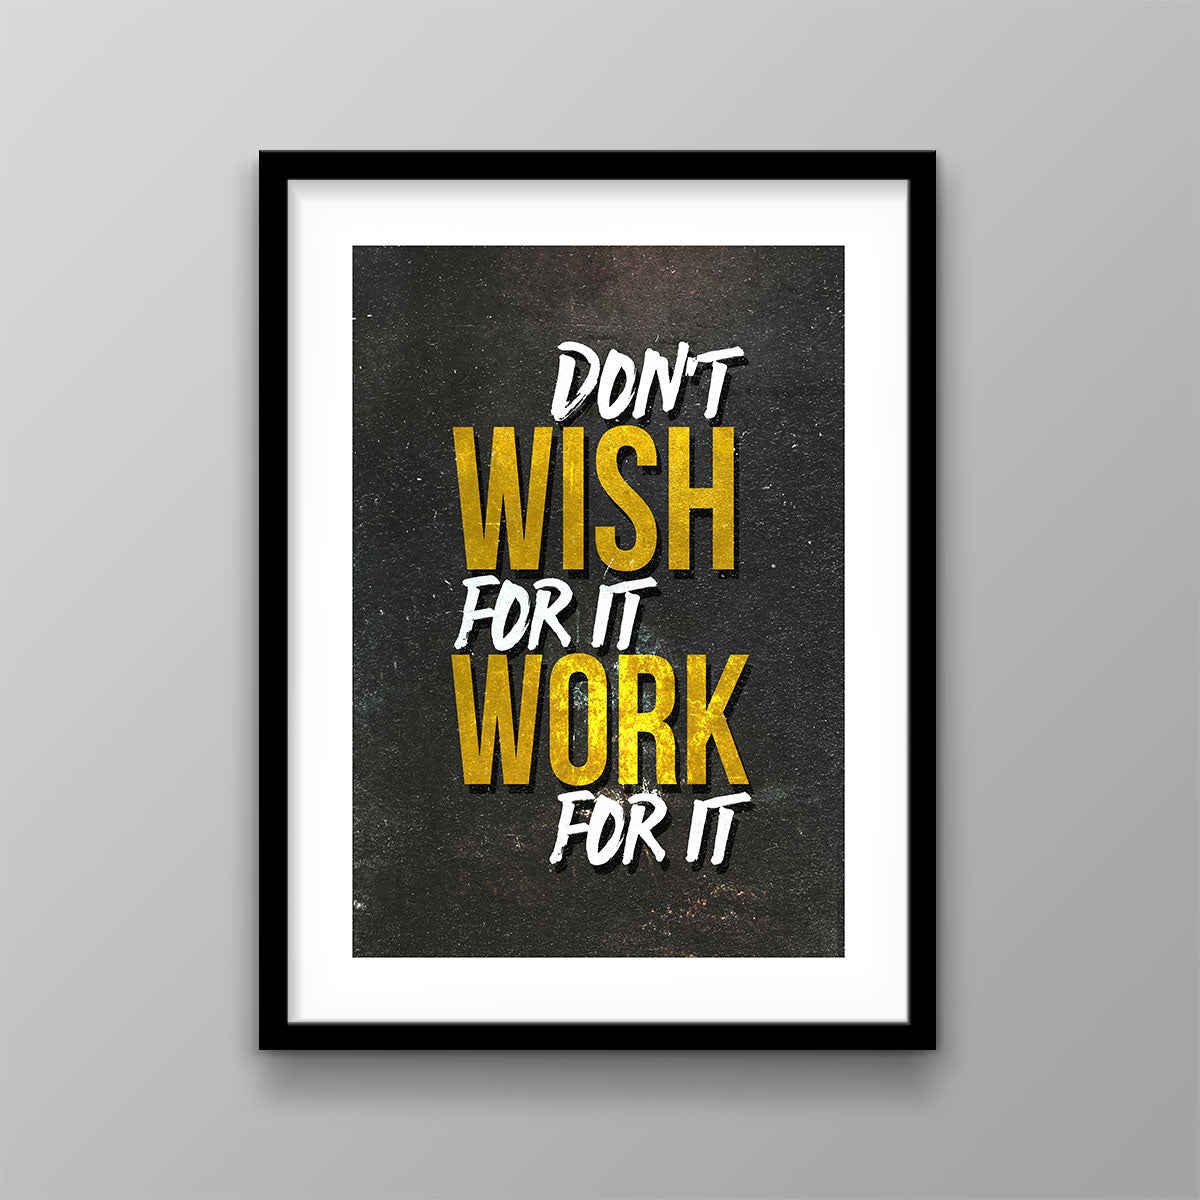 Don’t Wish For It - Success Hunters Prints